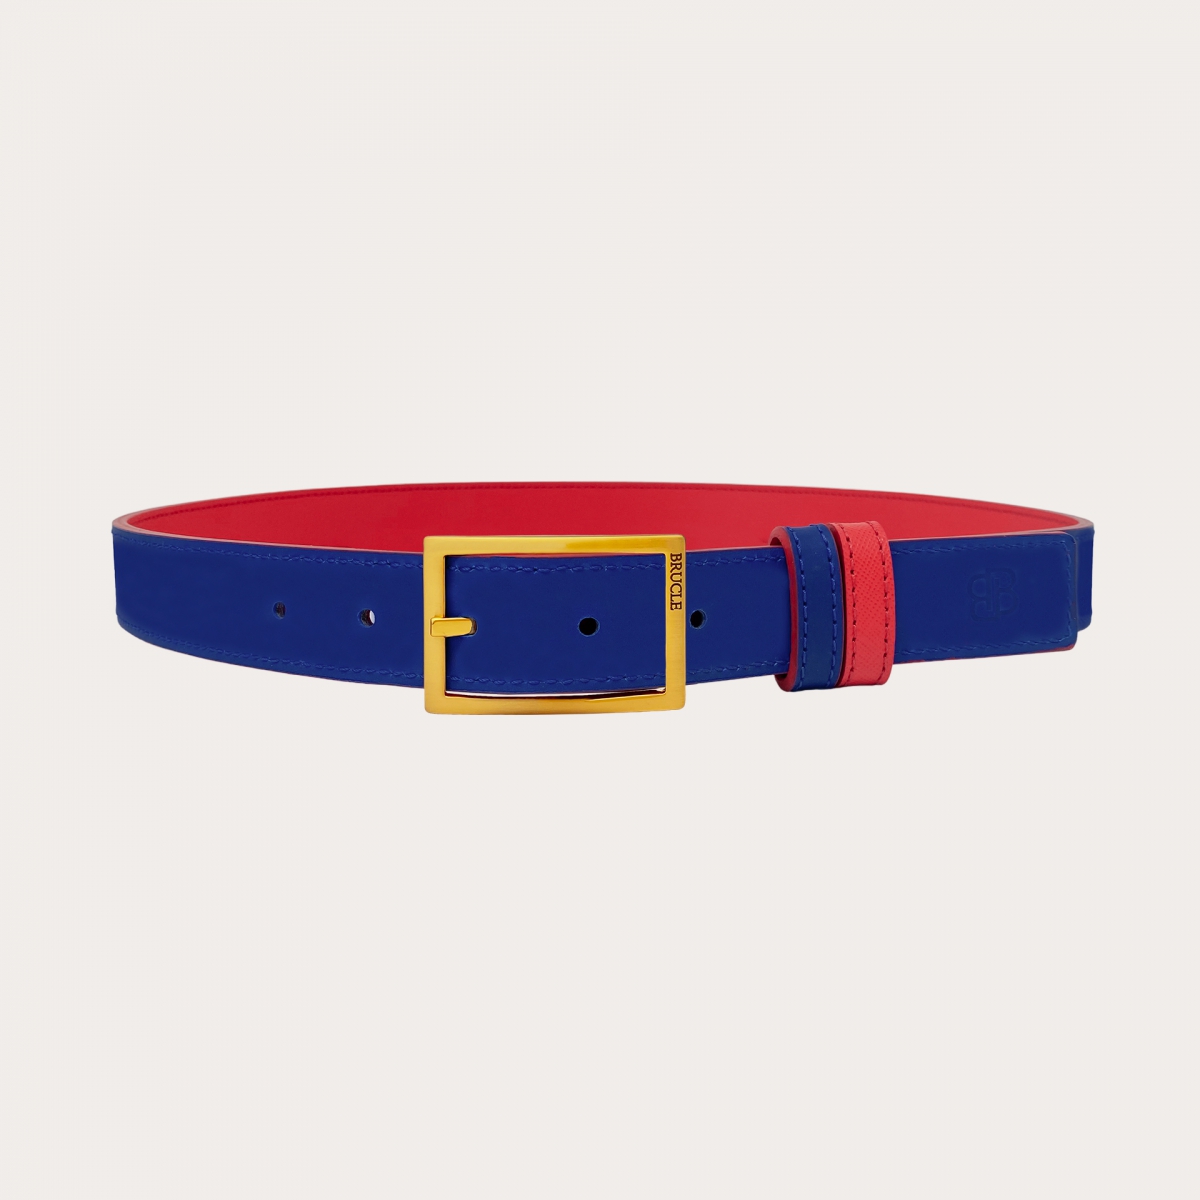 Reversible belt in red saffiano and blue royal leather